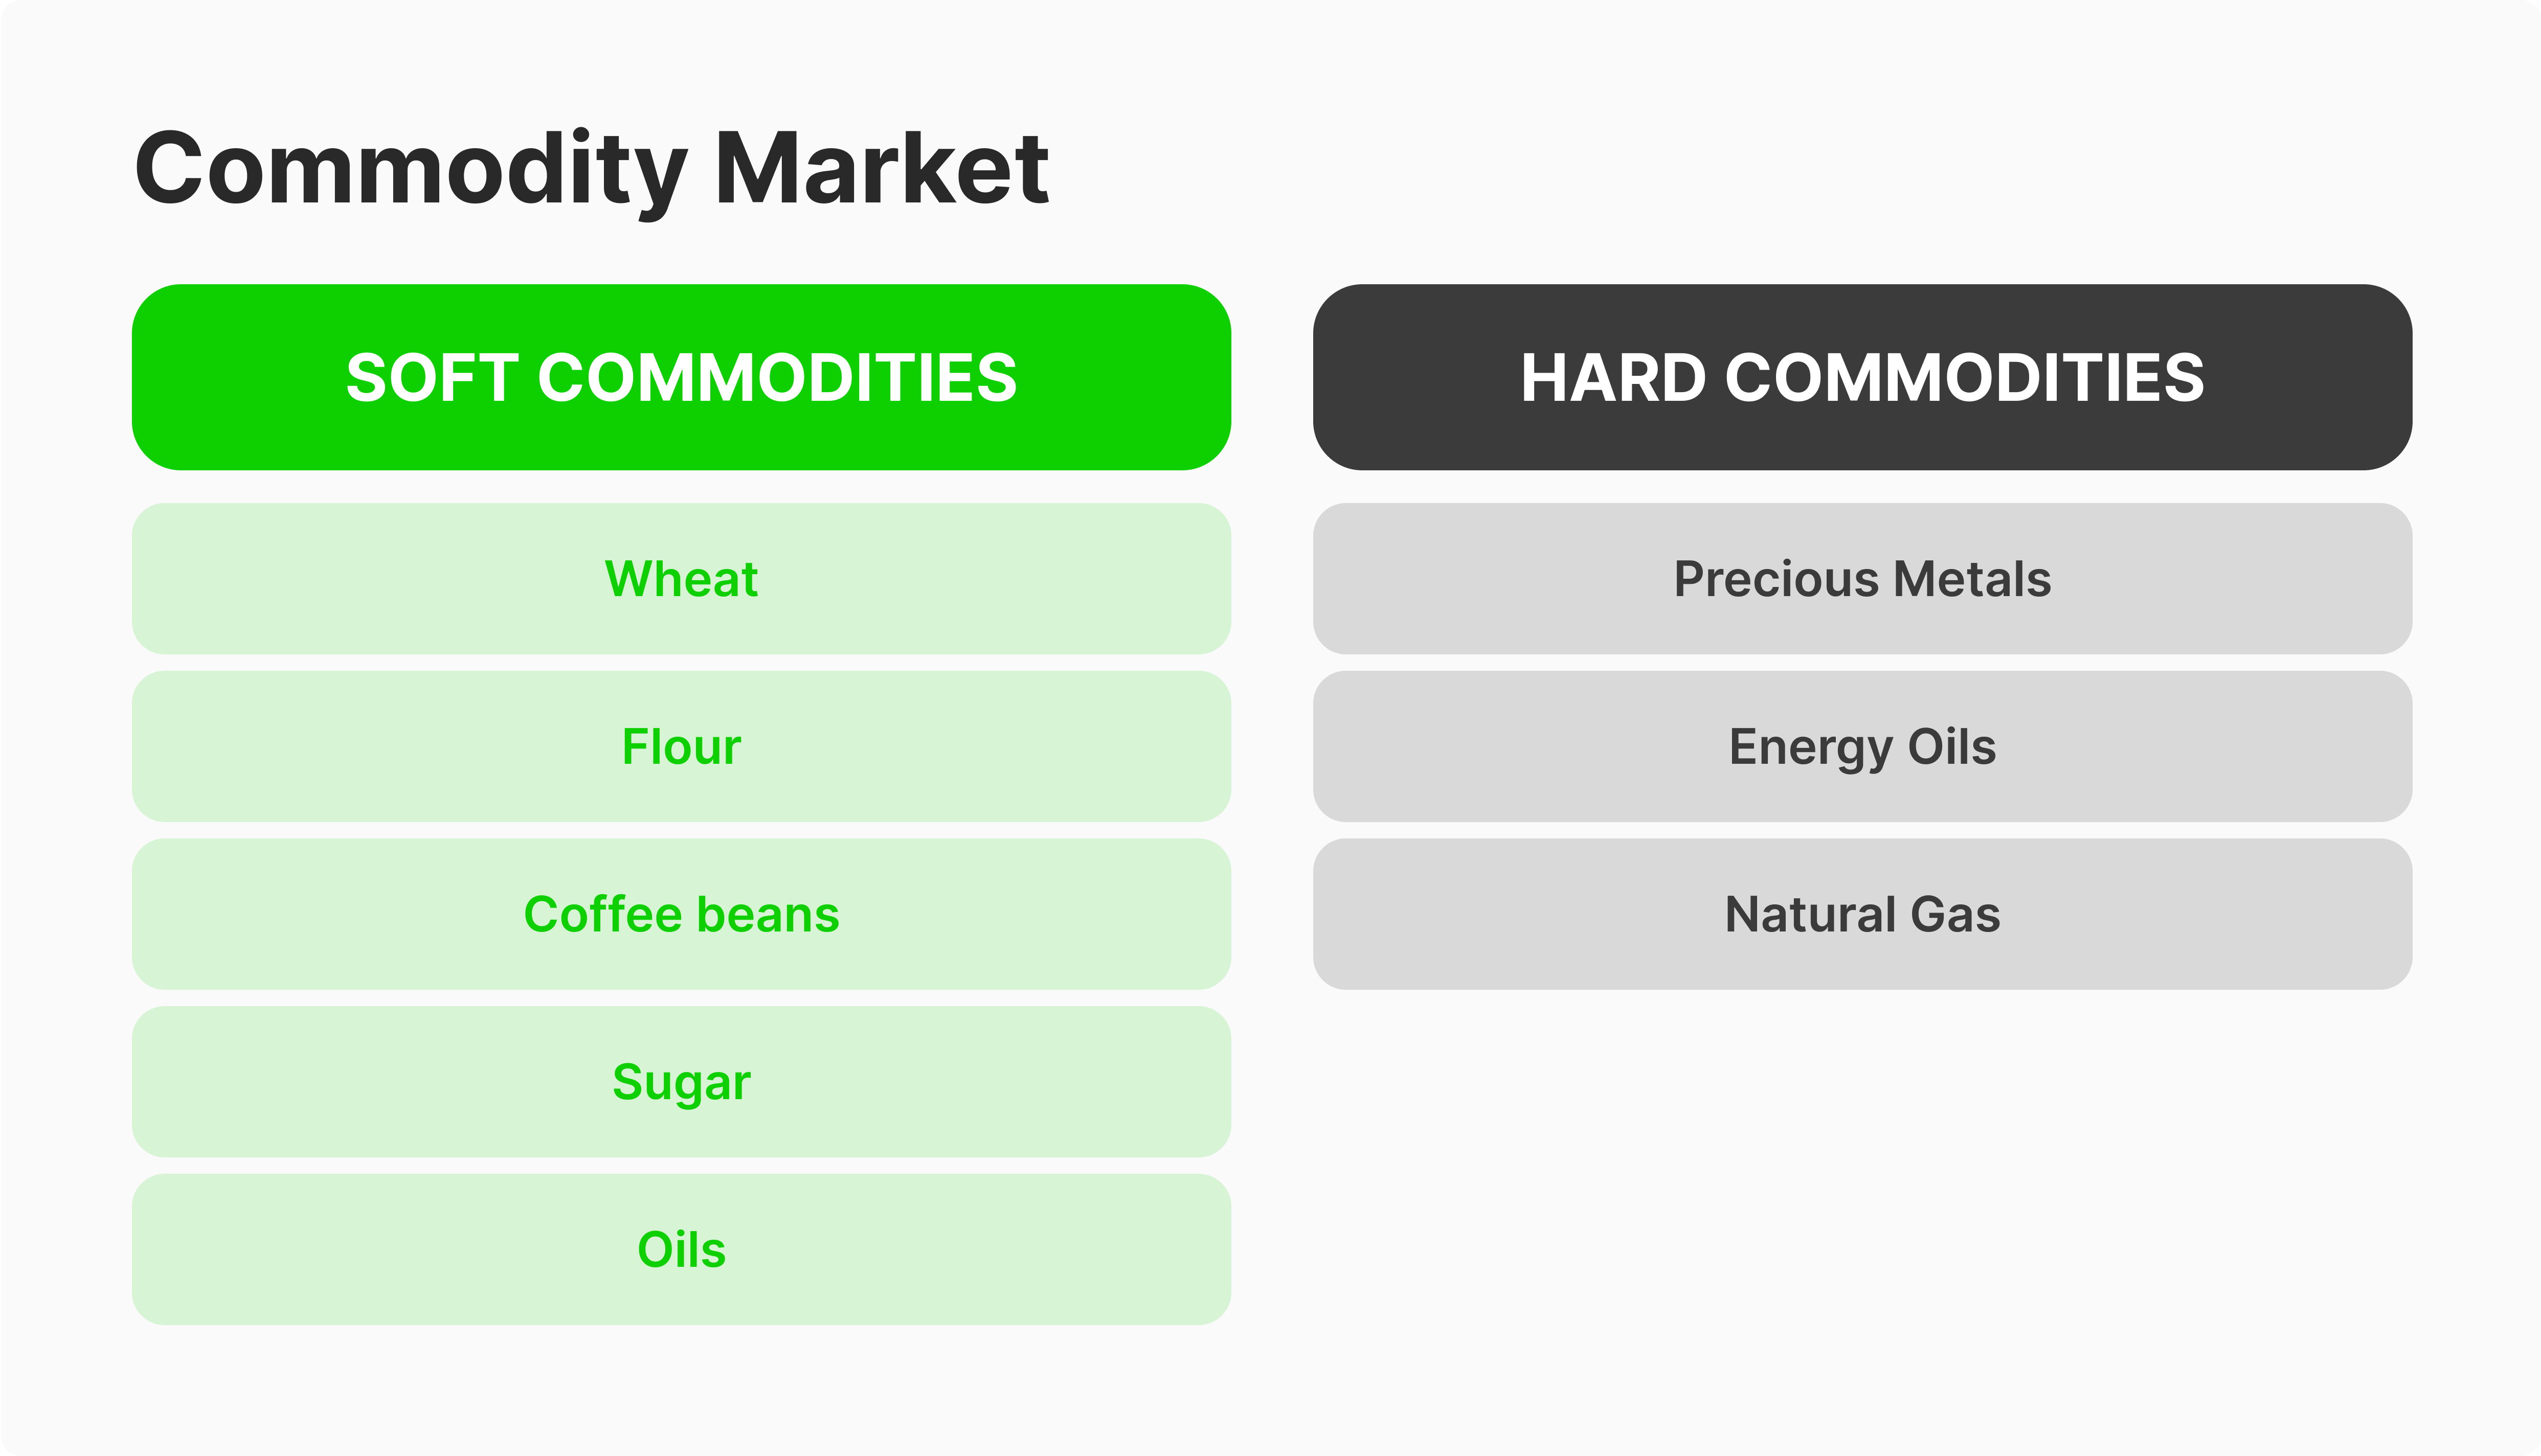 types of commodities